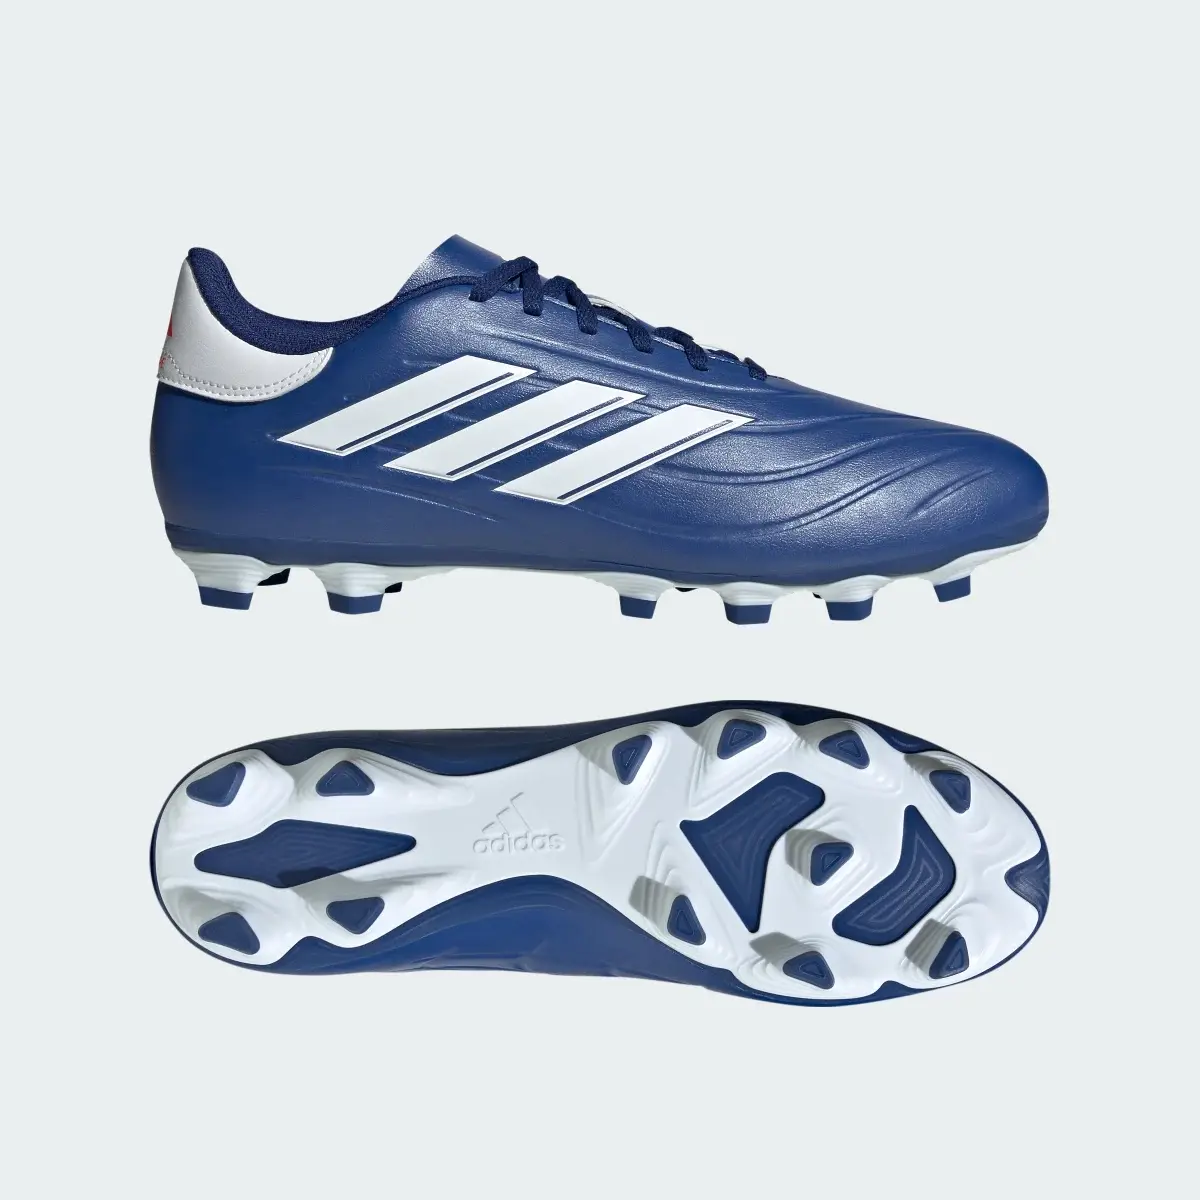 Adidas Copa Pure II.4 Flexible Ground Boots. 1